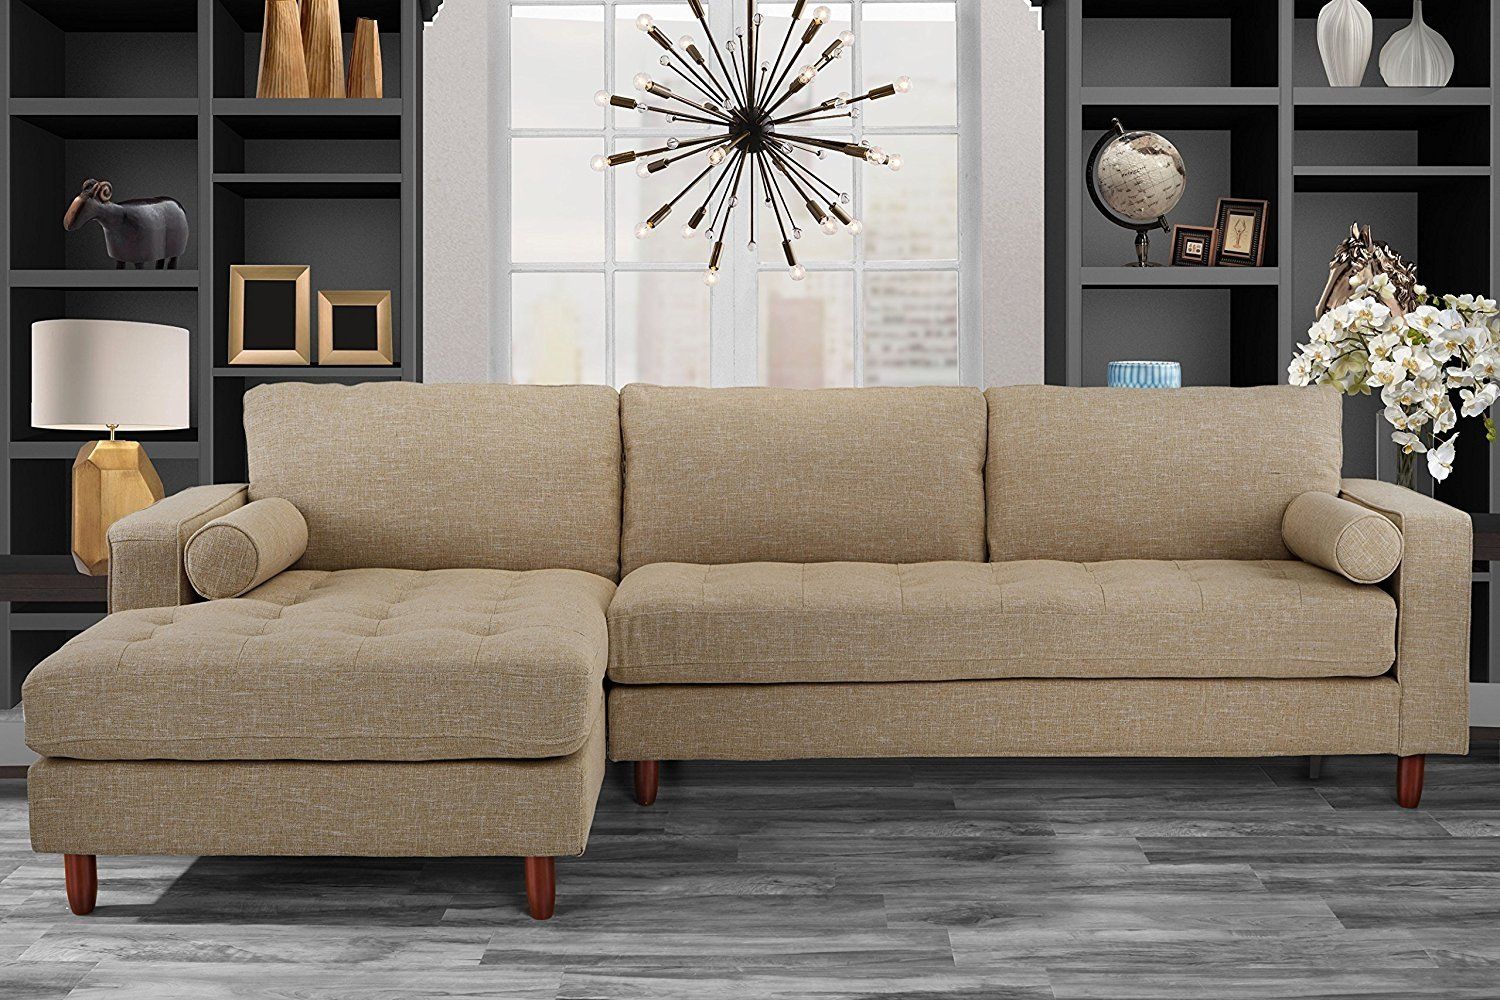 Mid Century Modern Tufted Fabric Sectional Sofa, L Shape Couch Beige Pertaining To Small L Shaped Sectional Sofas In Beige (Gallery 6 of 21)